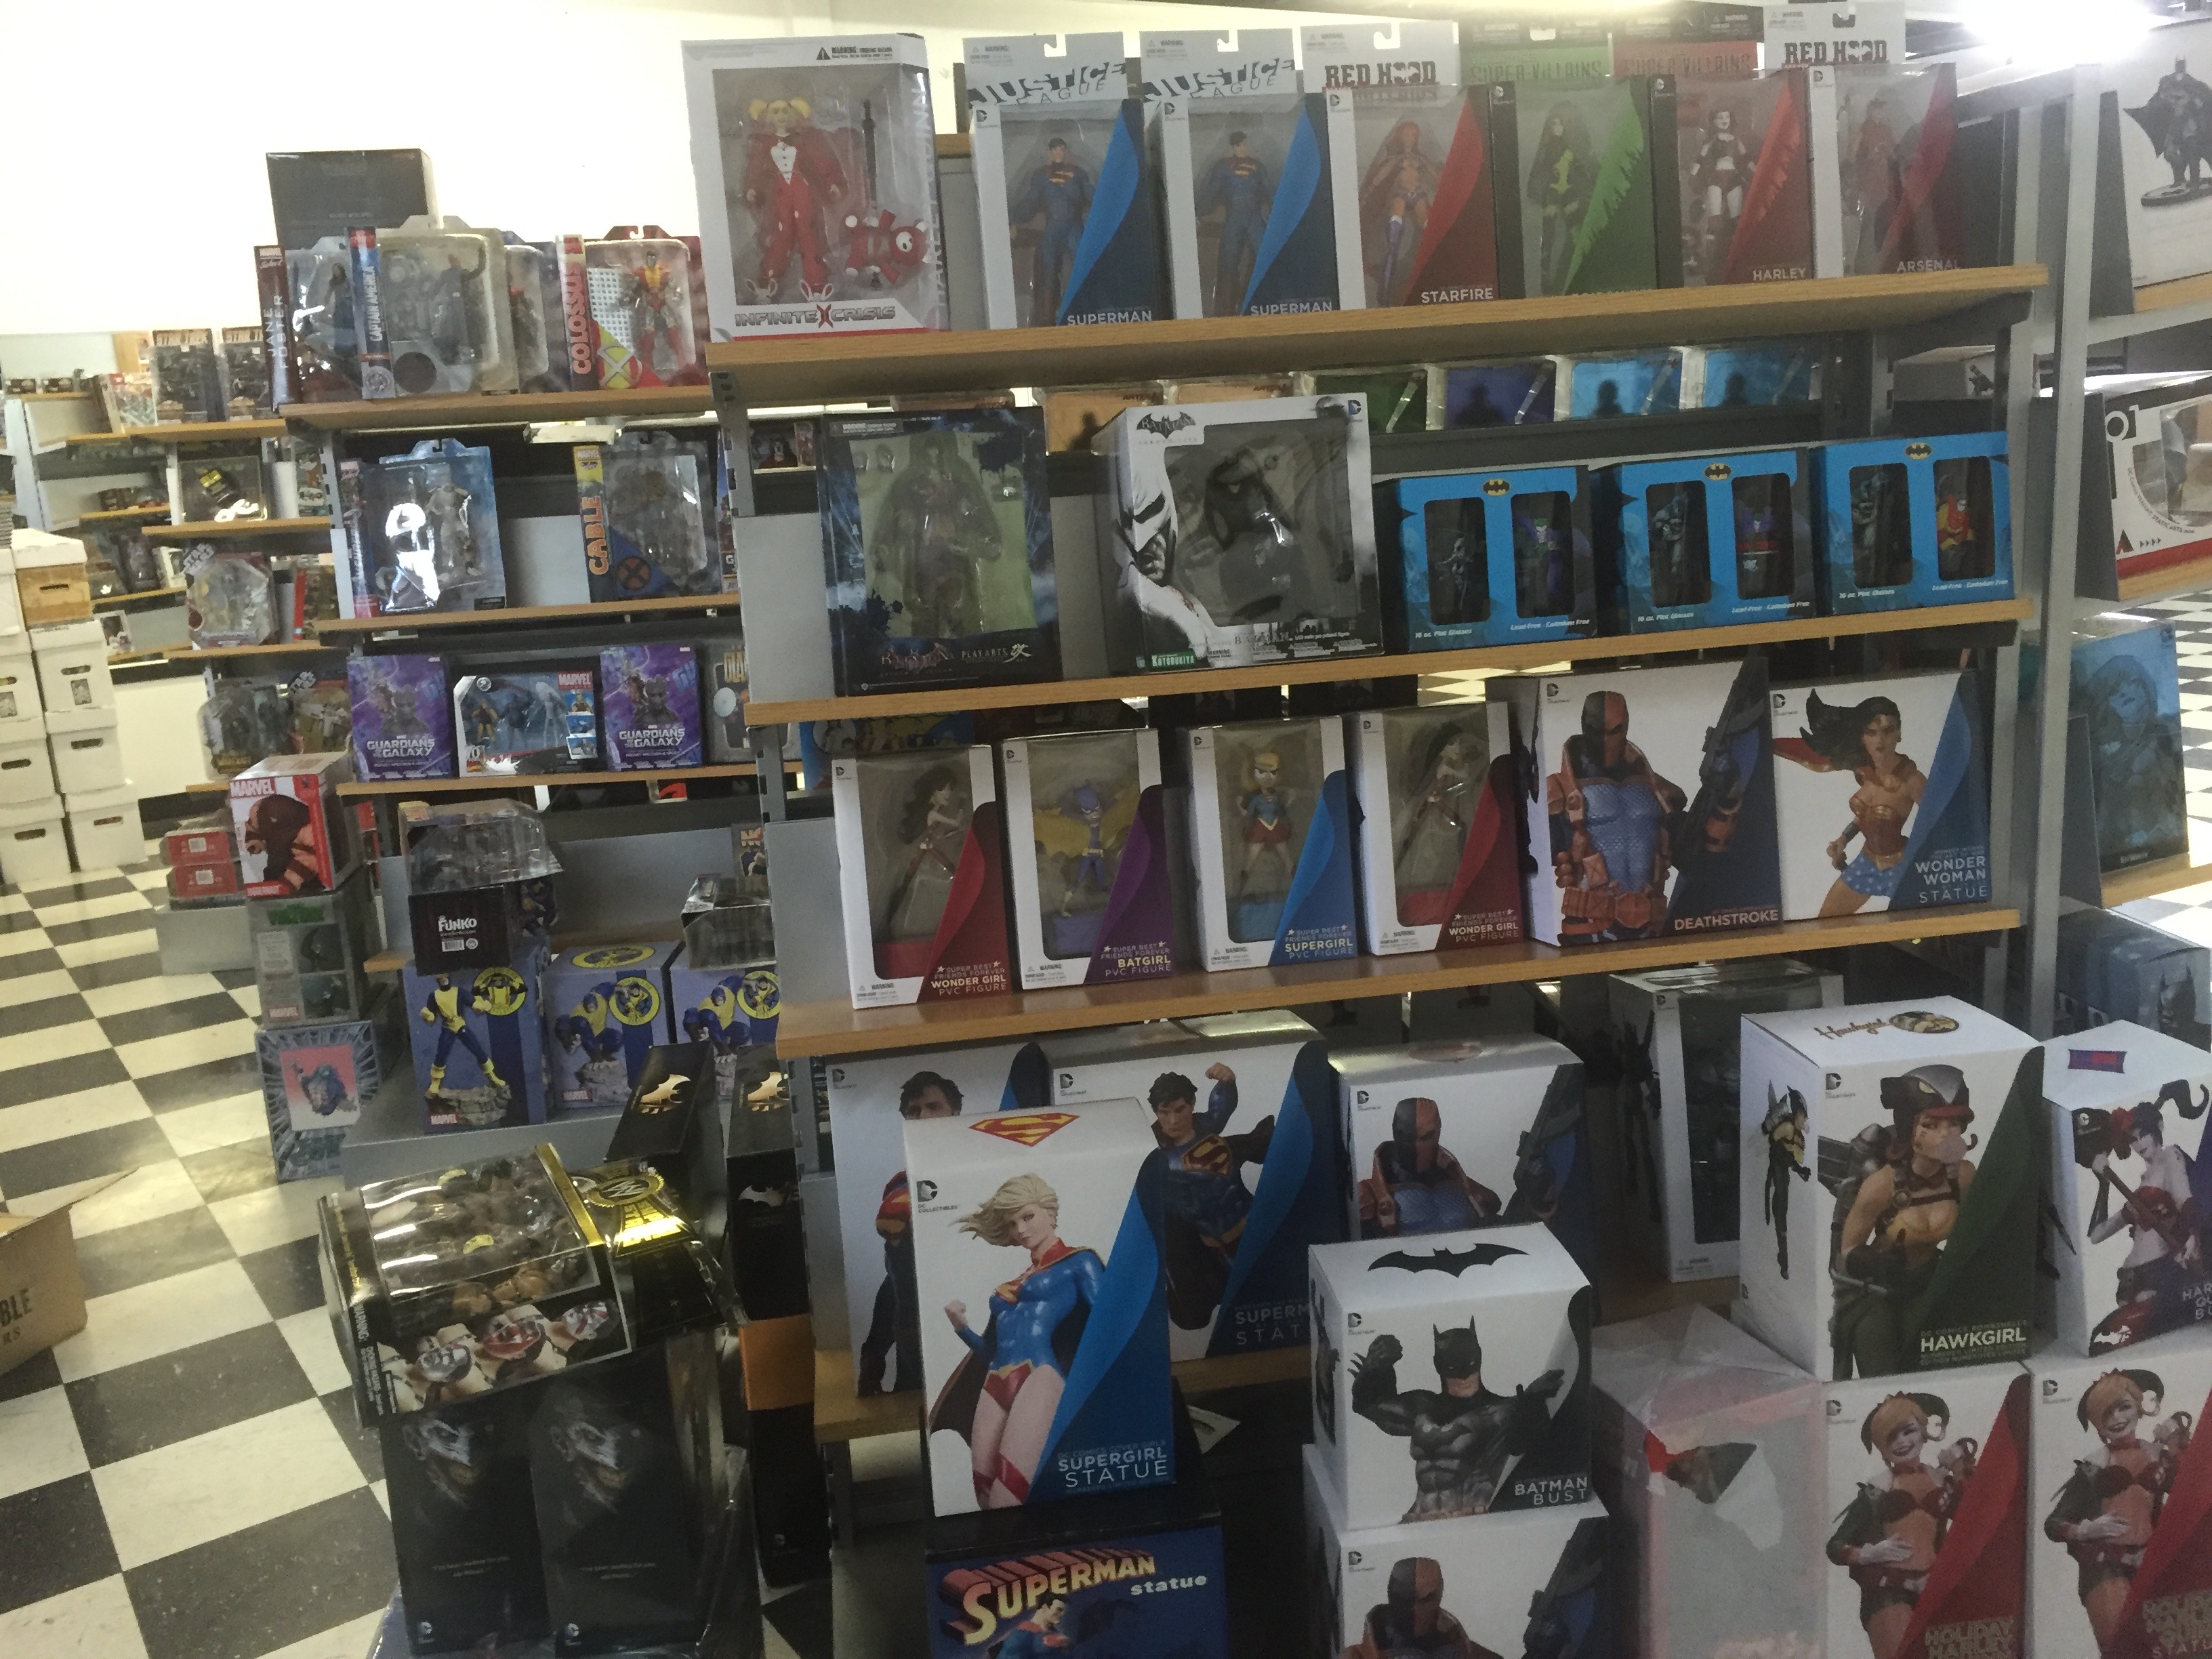 <span  class="uc_style_uc_tiles_grid_image_elementor_uc_items_attribute_title" style="color:#ffffff;">Toys and Statues at Mammoth Comics</span>